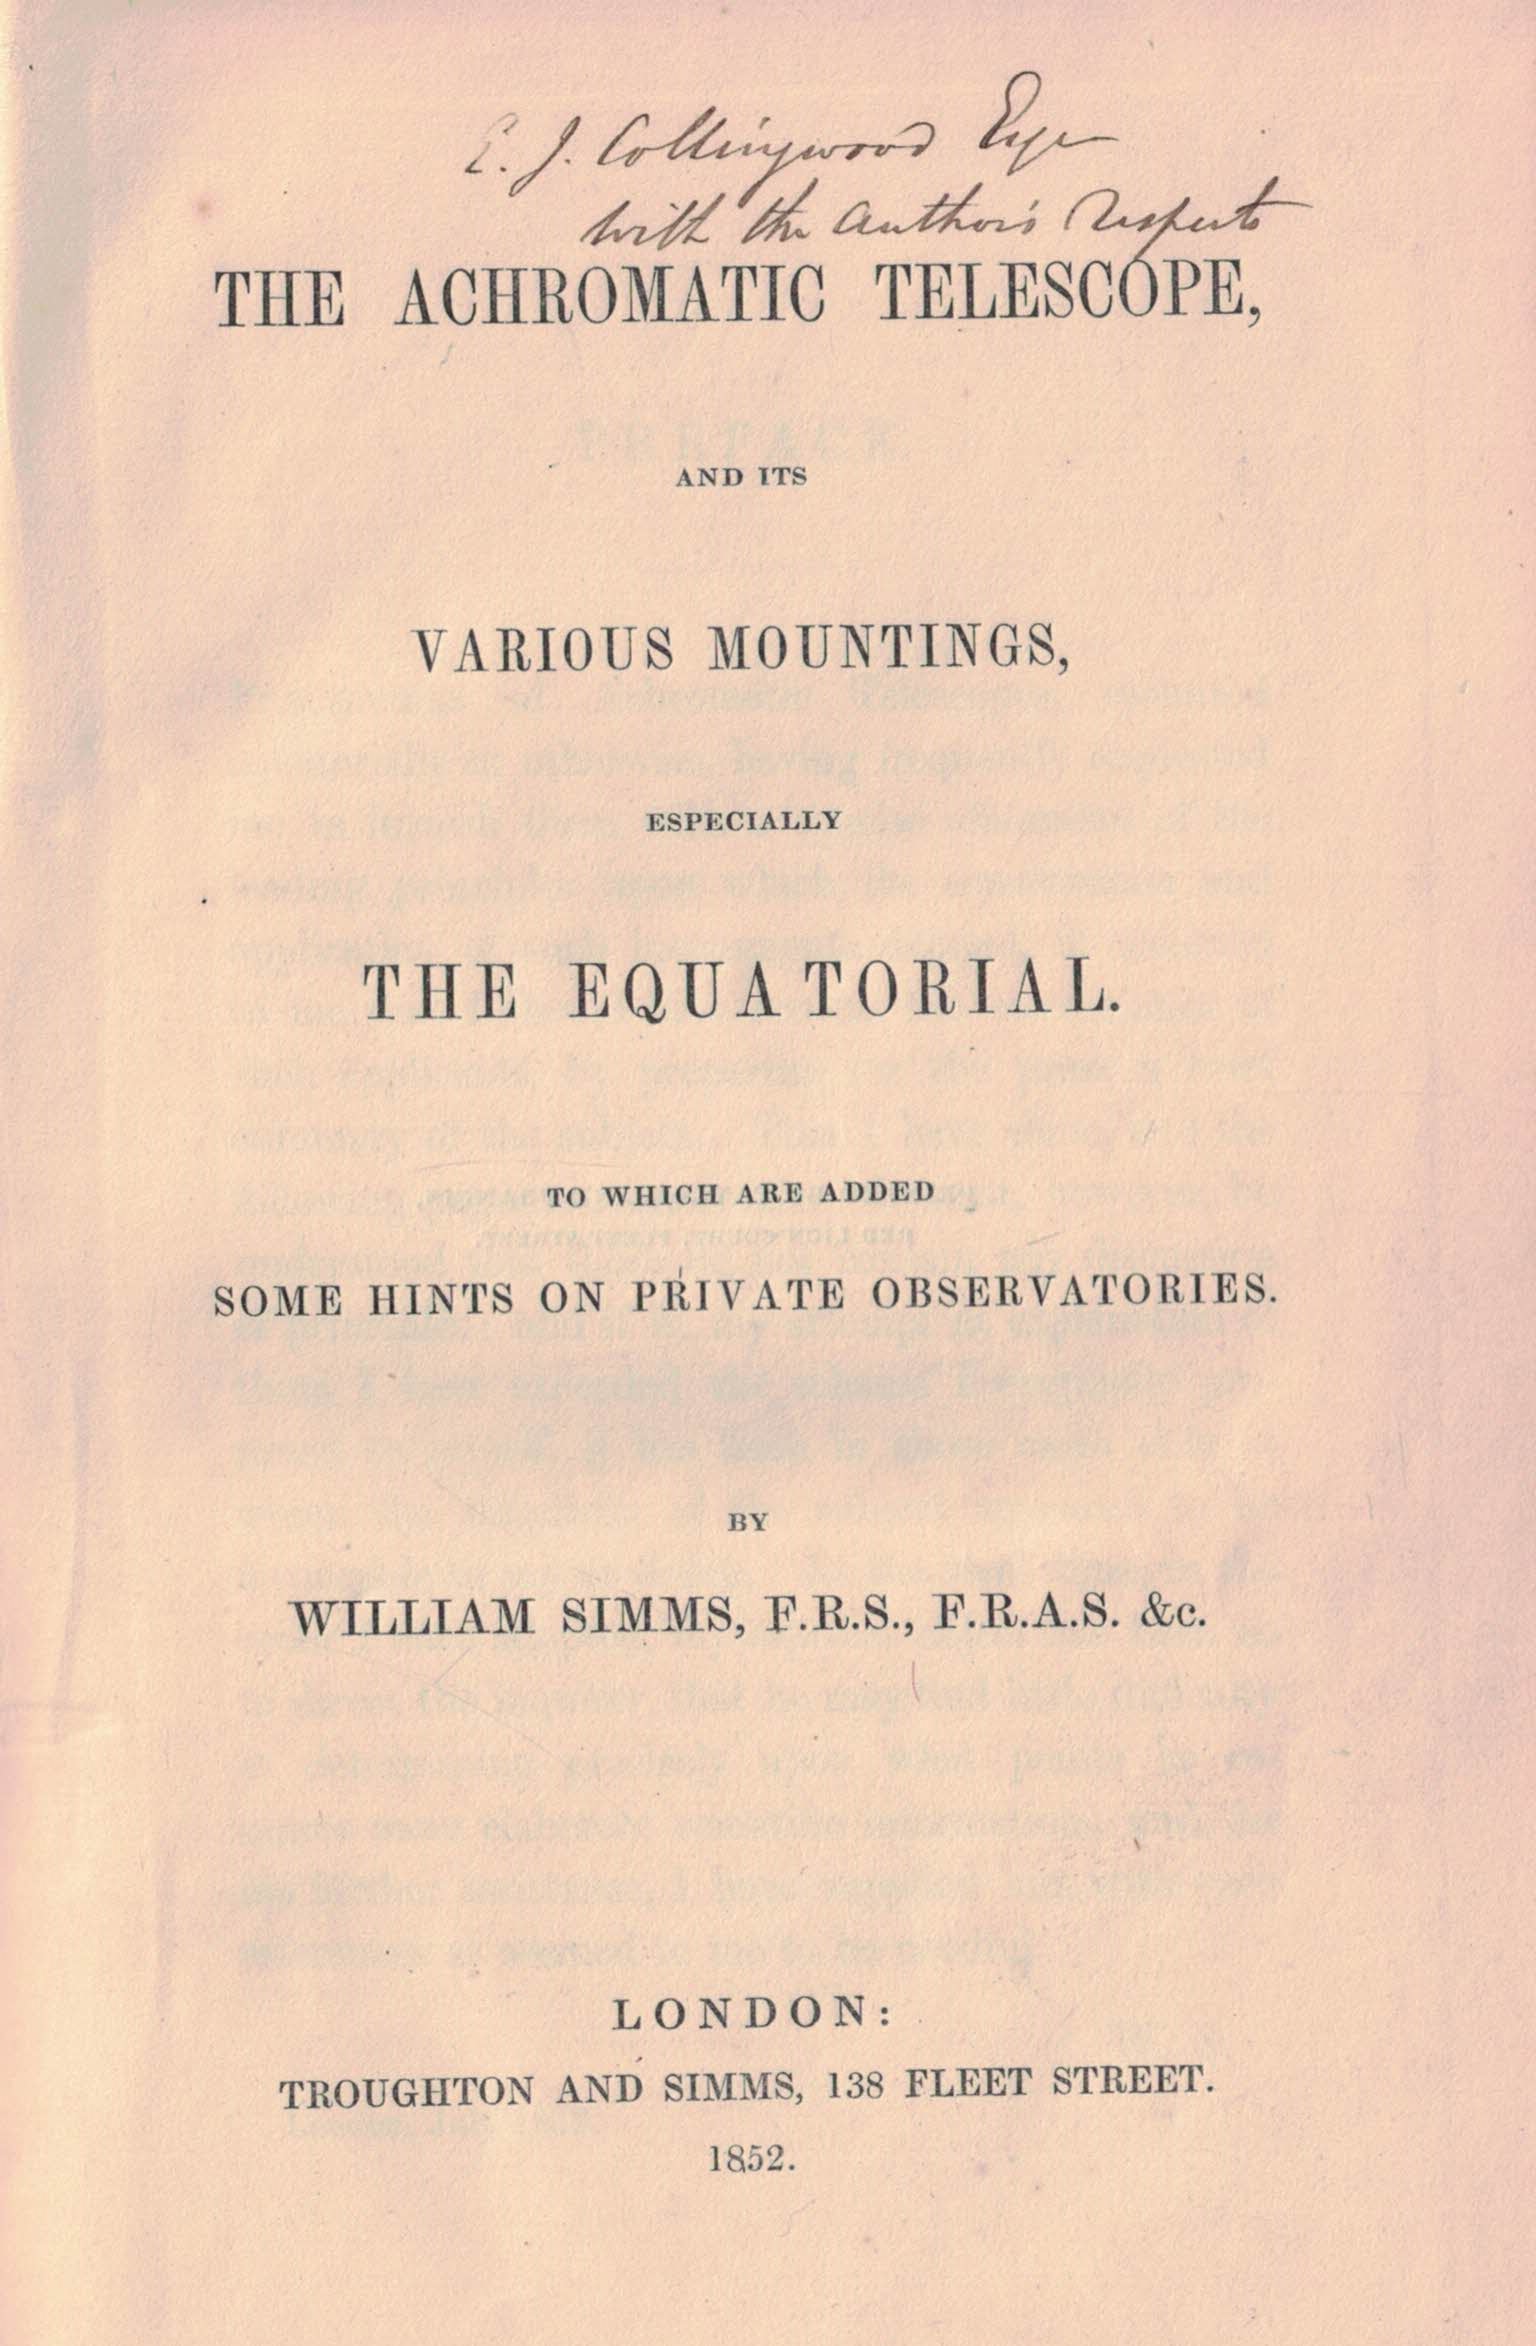 The Achromatic Telescope, and its Various Mountings, Especially the Equatorial. Inscribed Presentation Copy.